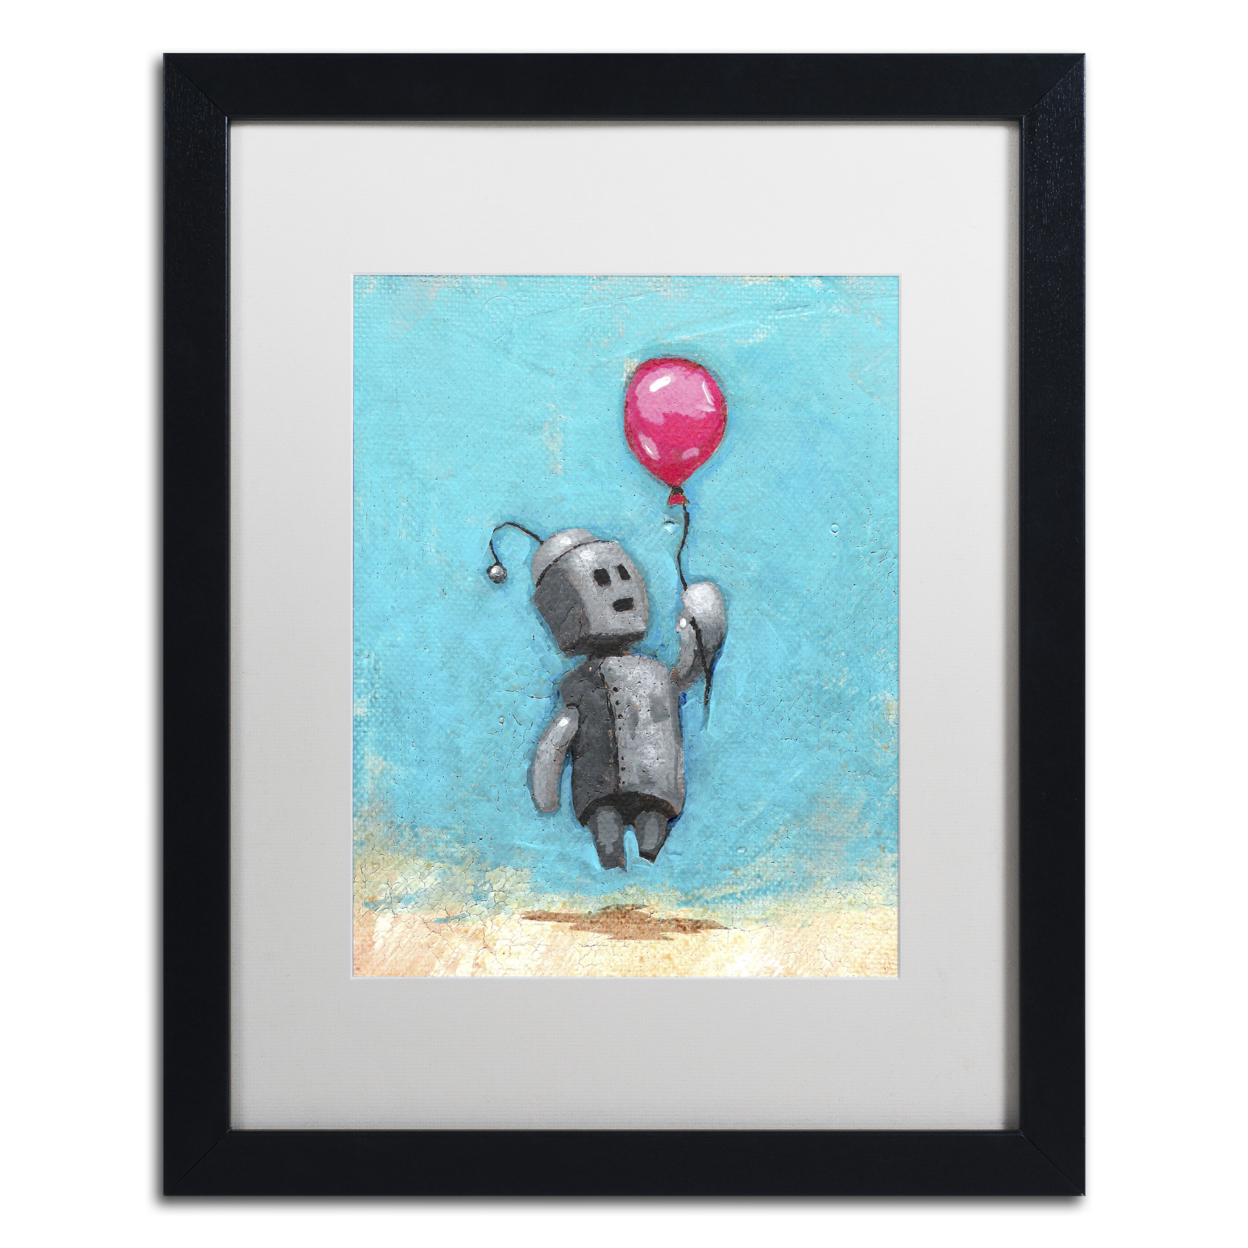 Craig Snodgrass 'Robot With Red Balloon' Black Wooden Framed Art 18 X 22 Inches